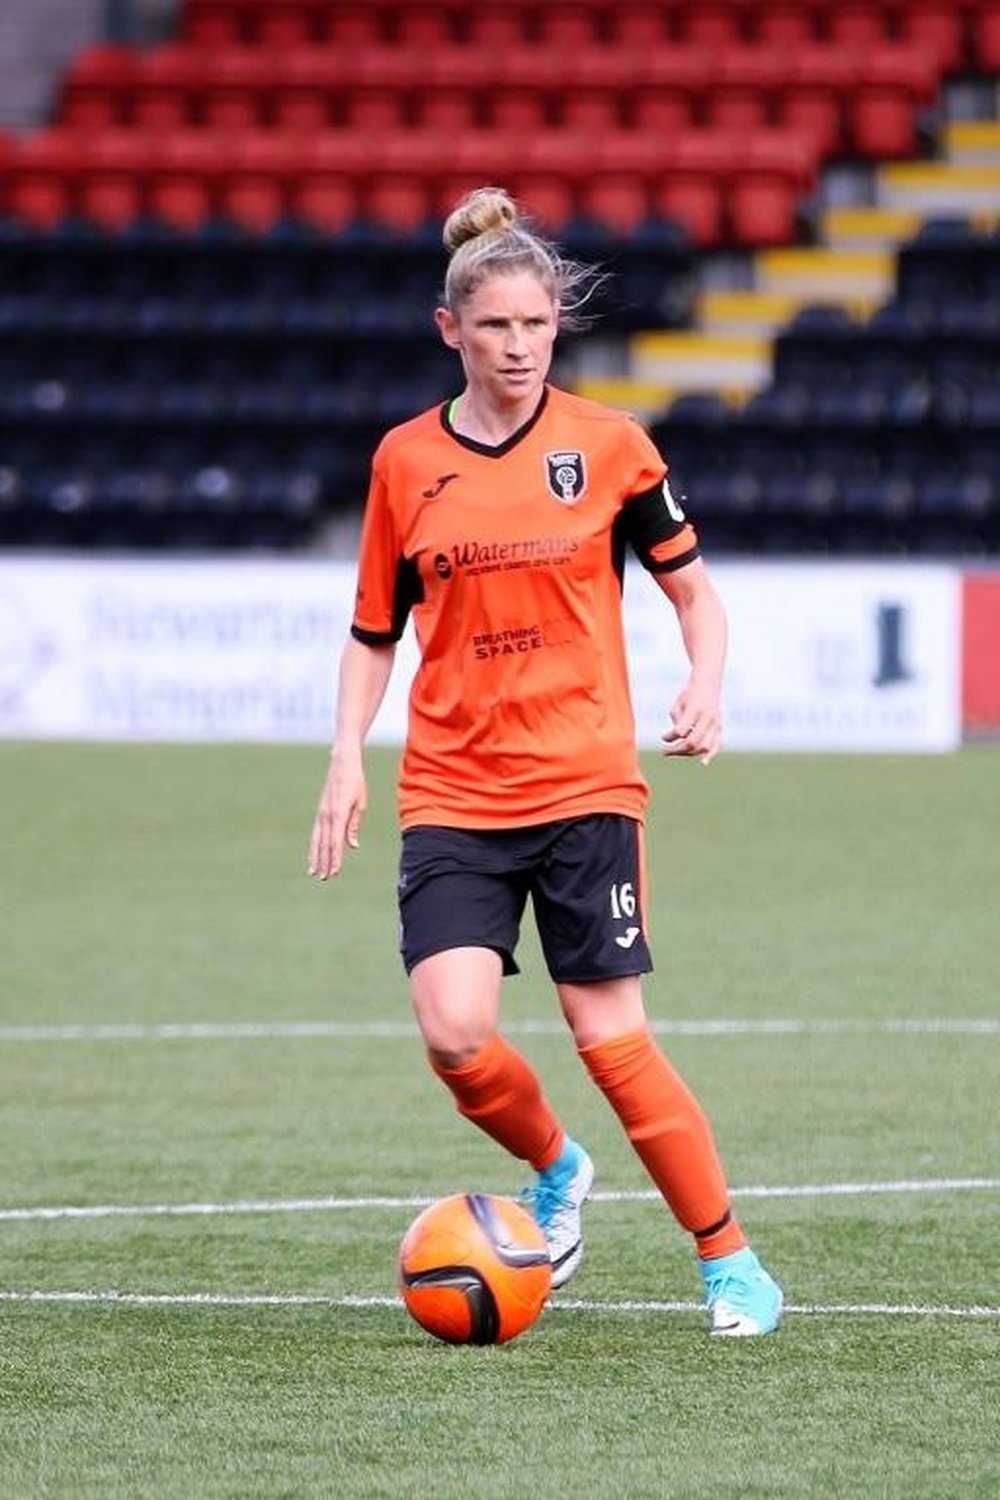 Leanne Ross is one of Scotland's top players. TommyHughes/GlasgowCityFC